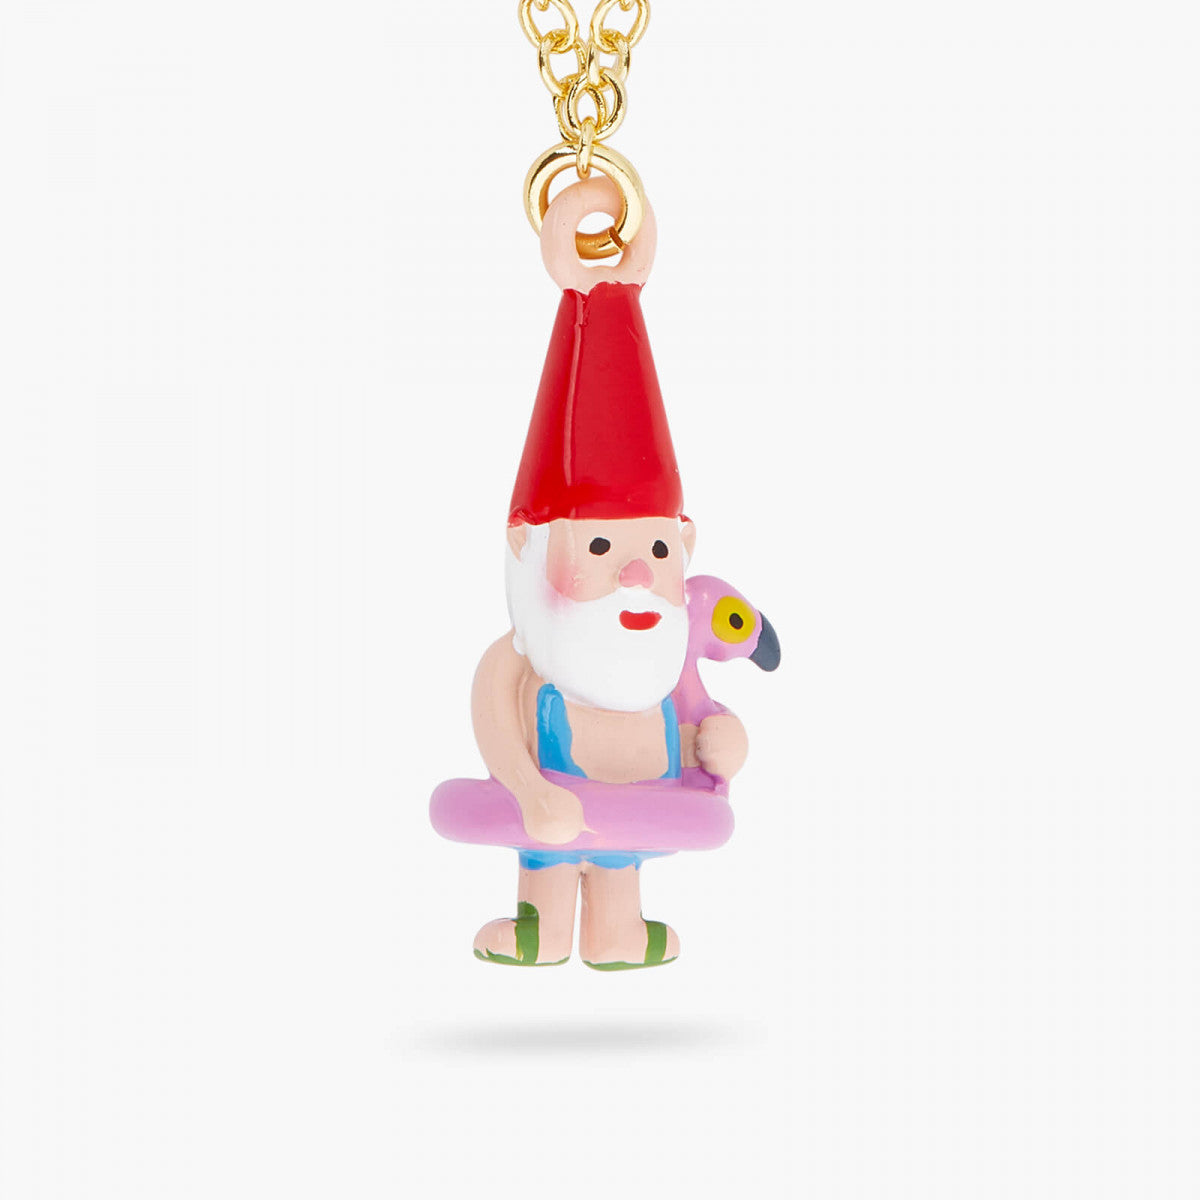 GARDEN GNOME AND INFLATABLE PINK FLAMINGO PENDANT NECKLACE